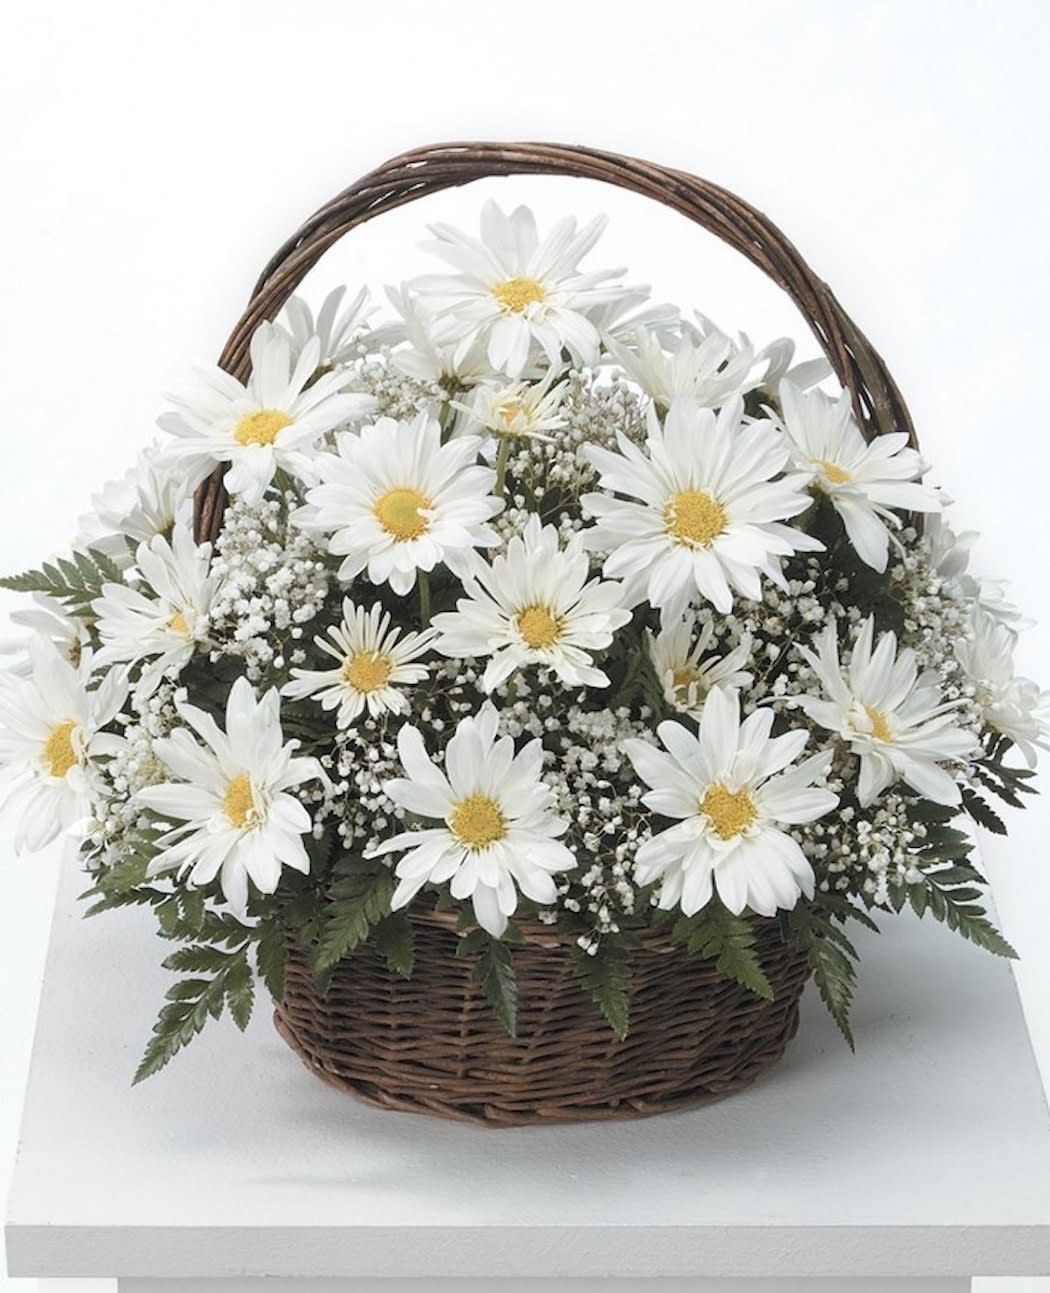 Basket of Daisies - Wicker handled basket filled with White Daisies and baby's breath.